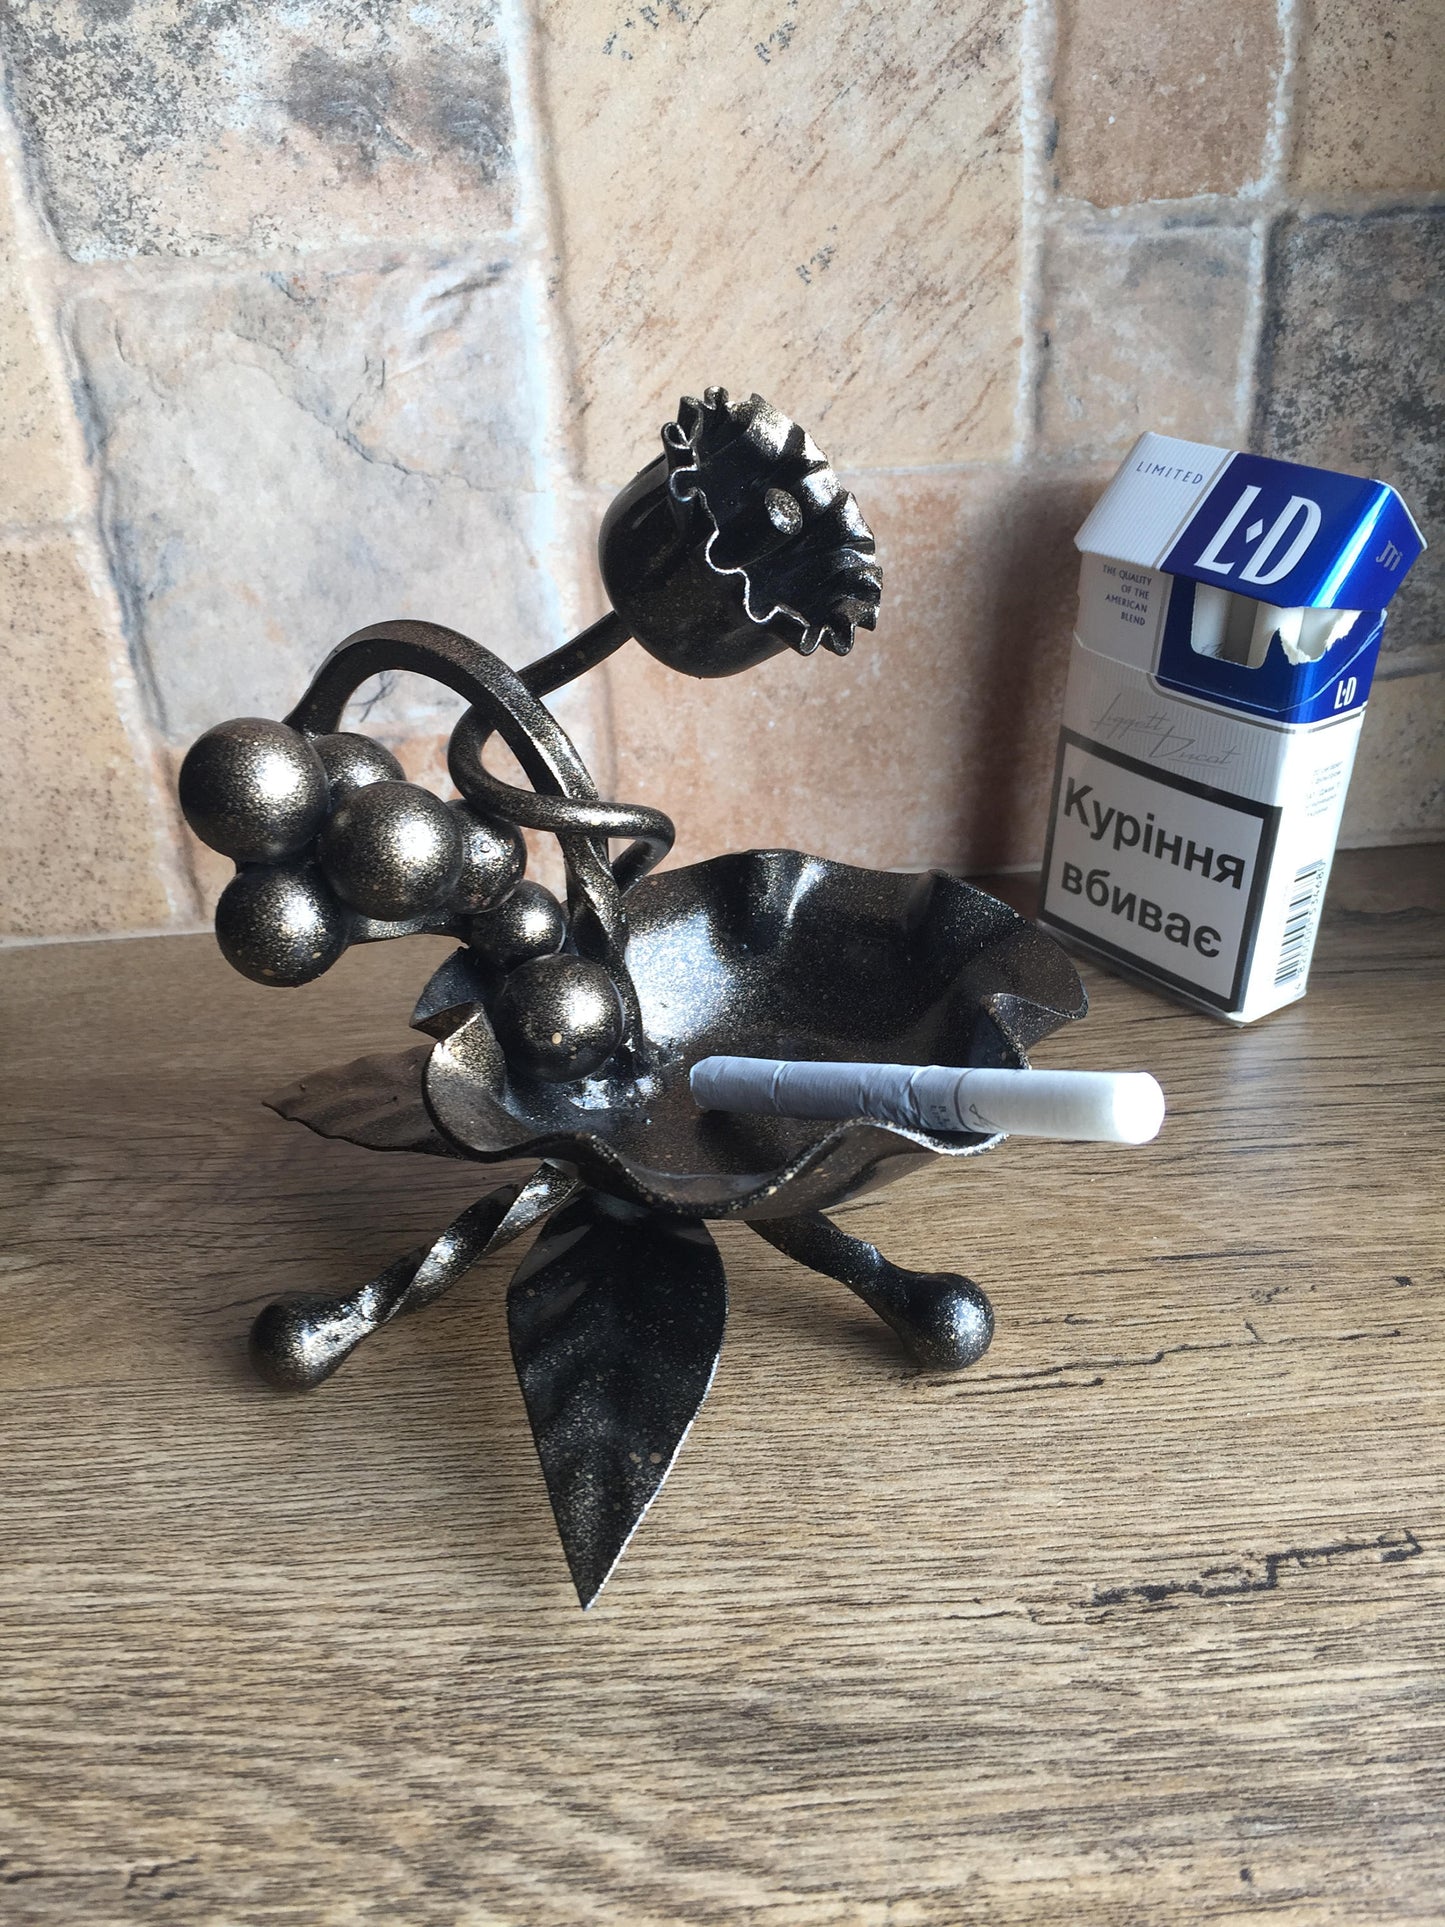 Iron ashtray, iron gifts, ash tray,iron anniversary gift for her,gift for smoker, cigar ashtray,cigar holder,mens gift,manly gift,metal art